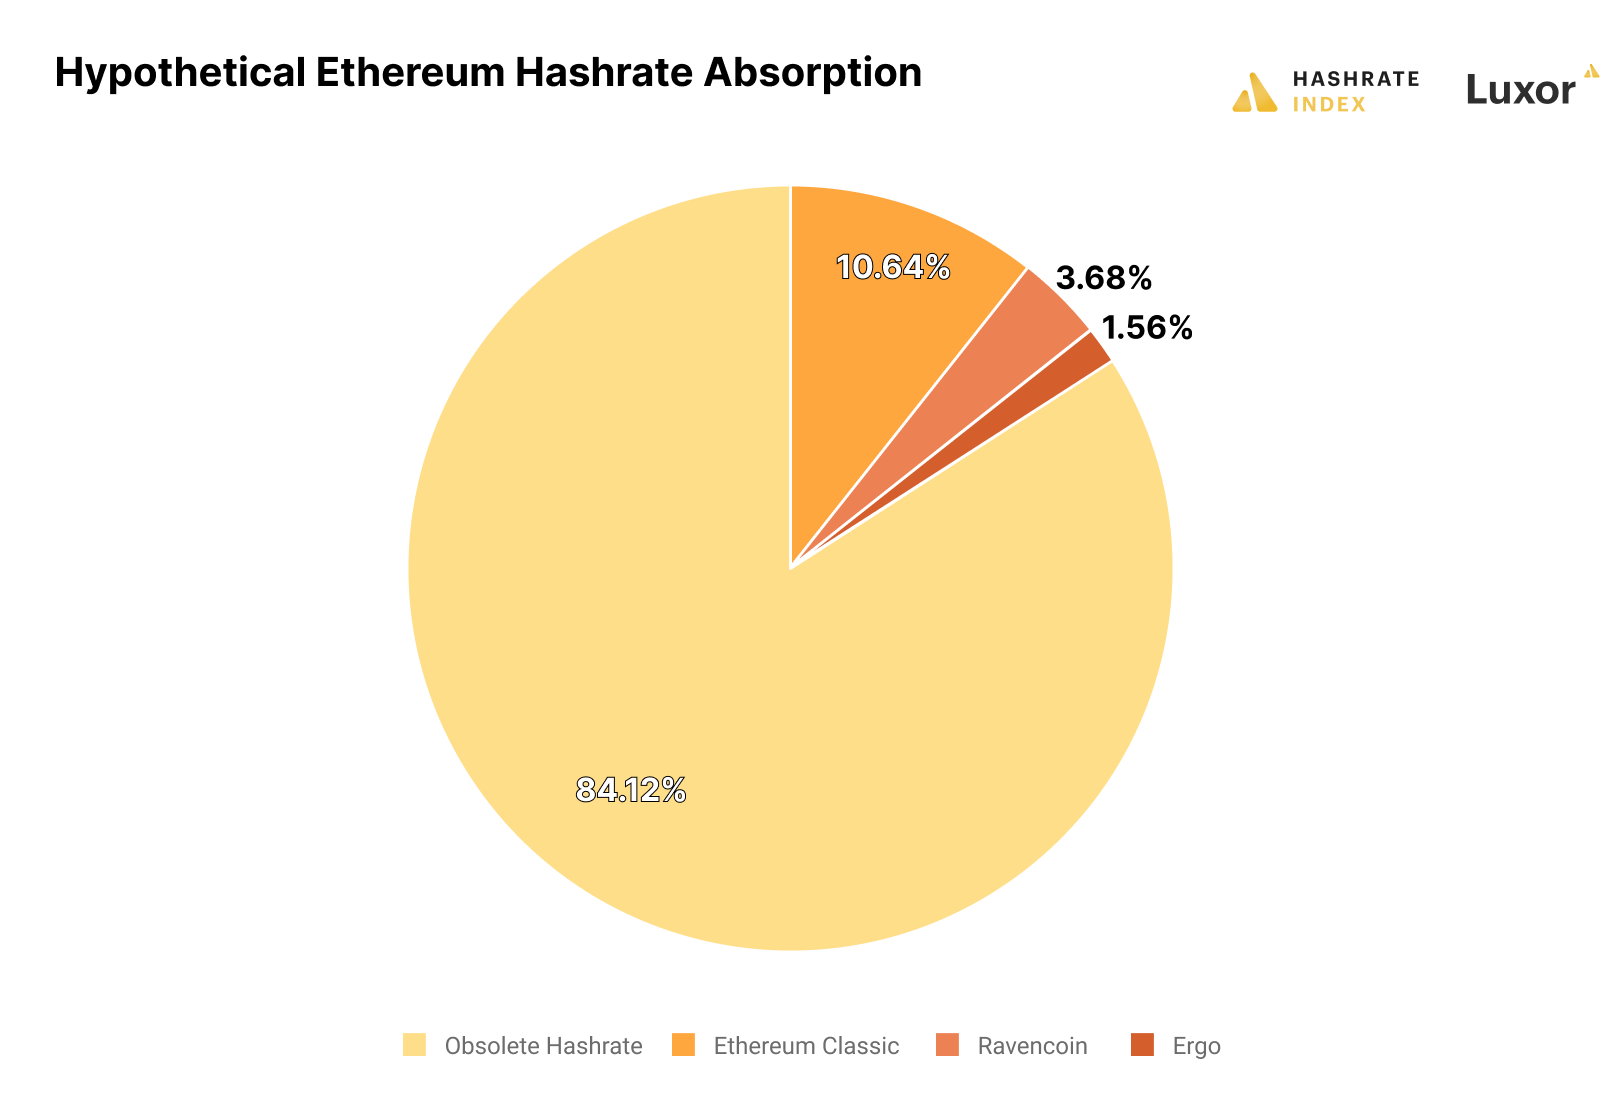 Hypothetical Ethereum Hashrate Absorption of Ethereum Classic, Ravencoin, and Ergo on a percentage basis given average hardware efficiency of 2.55 J/TH and $0.06/kWh power cost | Source: Luxor business data, 2Miners